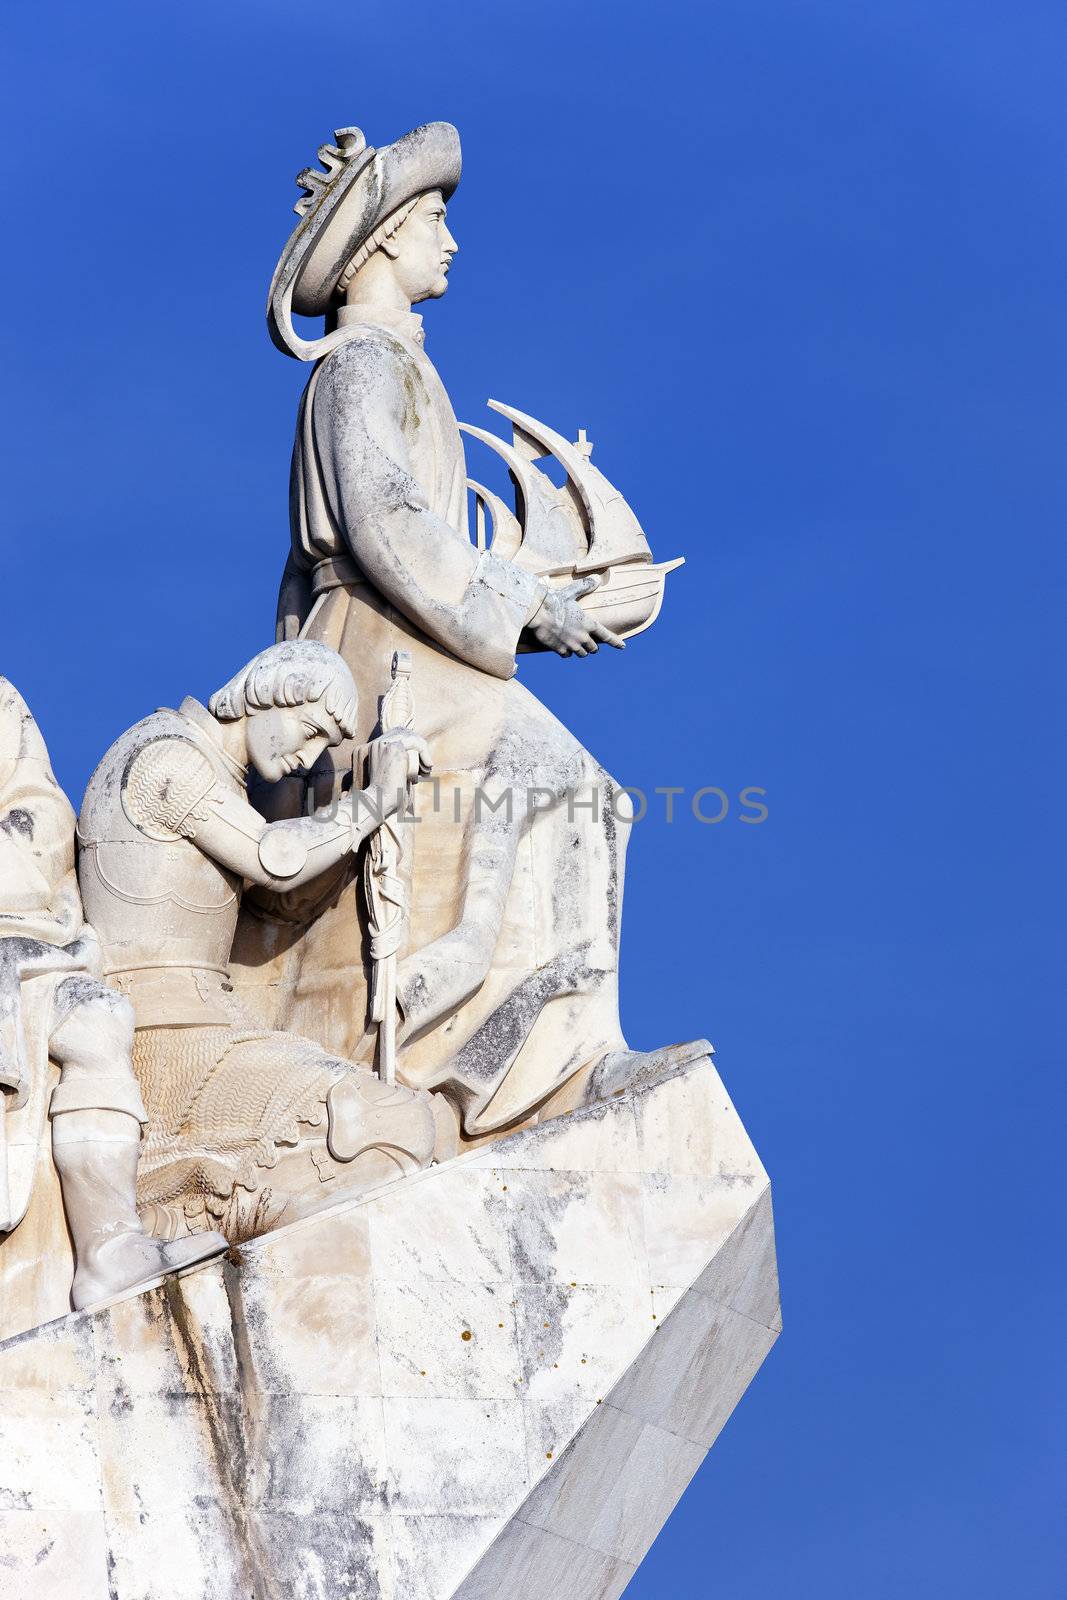 part of the Padrao dos Descobrimentos, monument in Lisbon